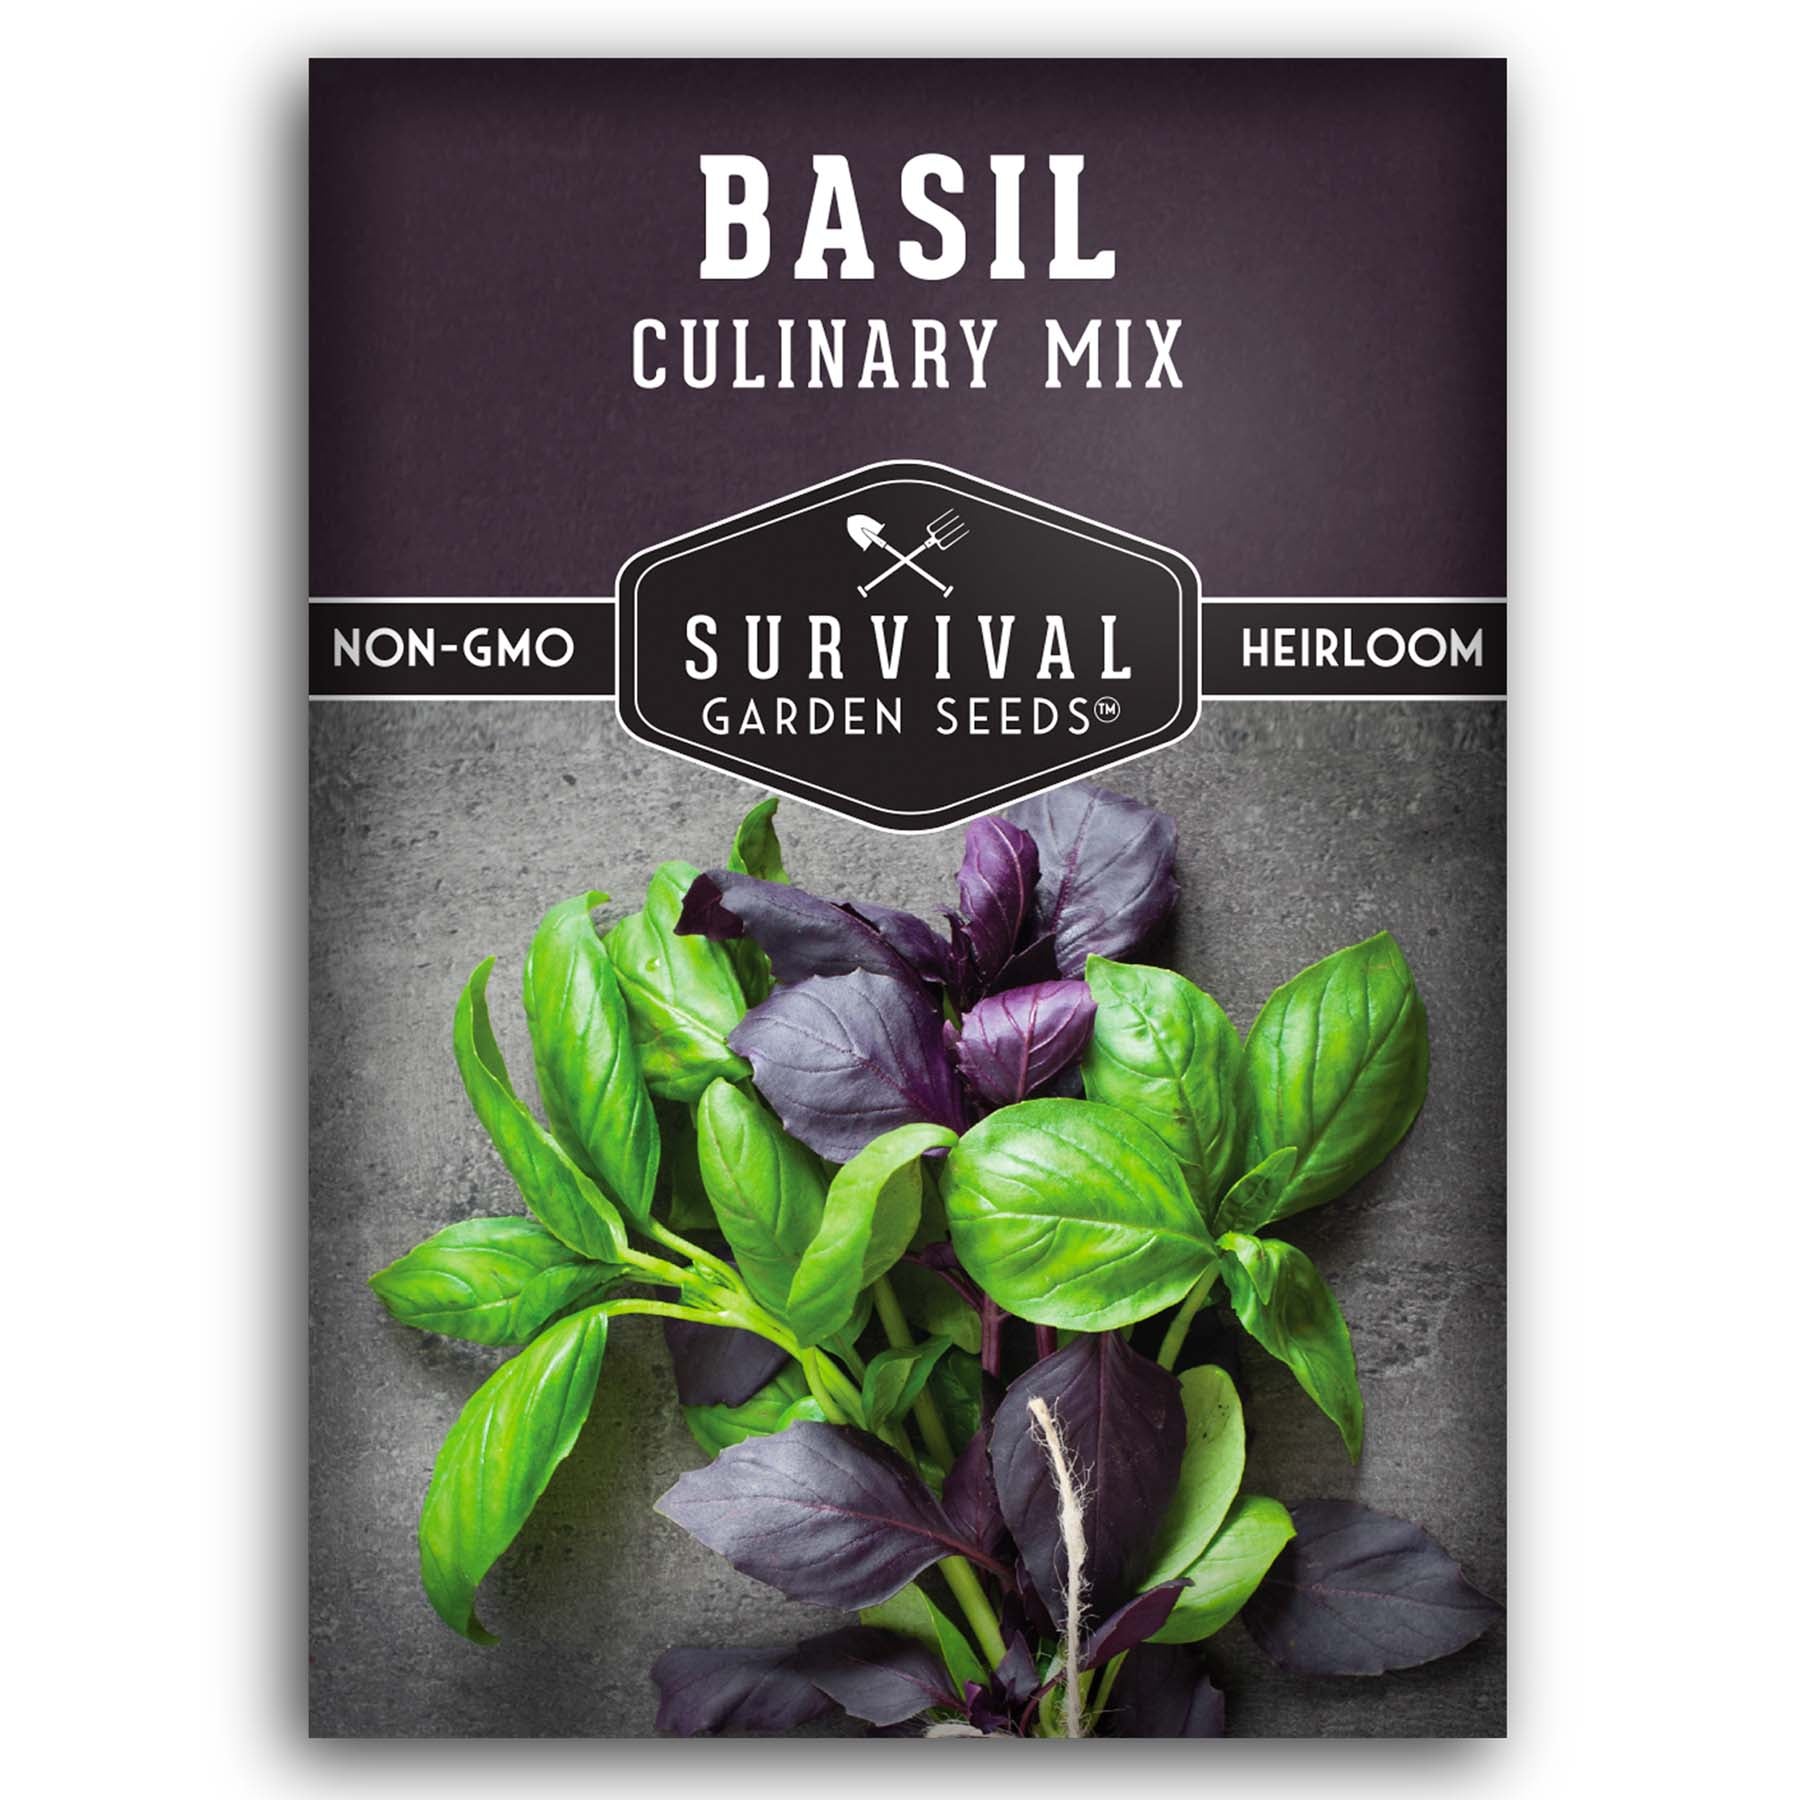 Culinary Mix of Basil Seeds for planting